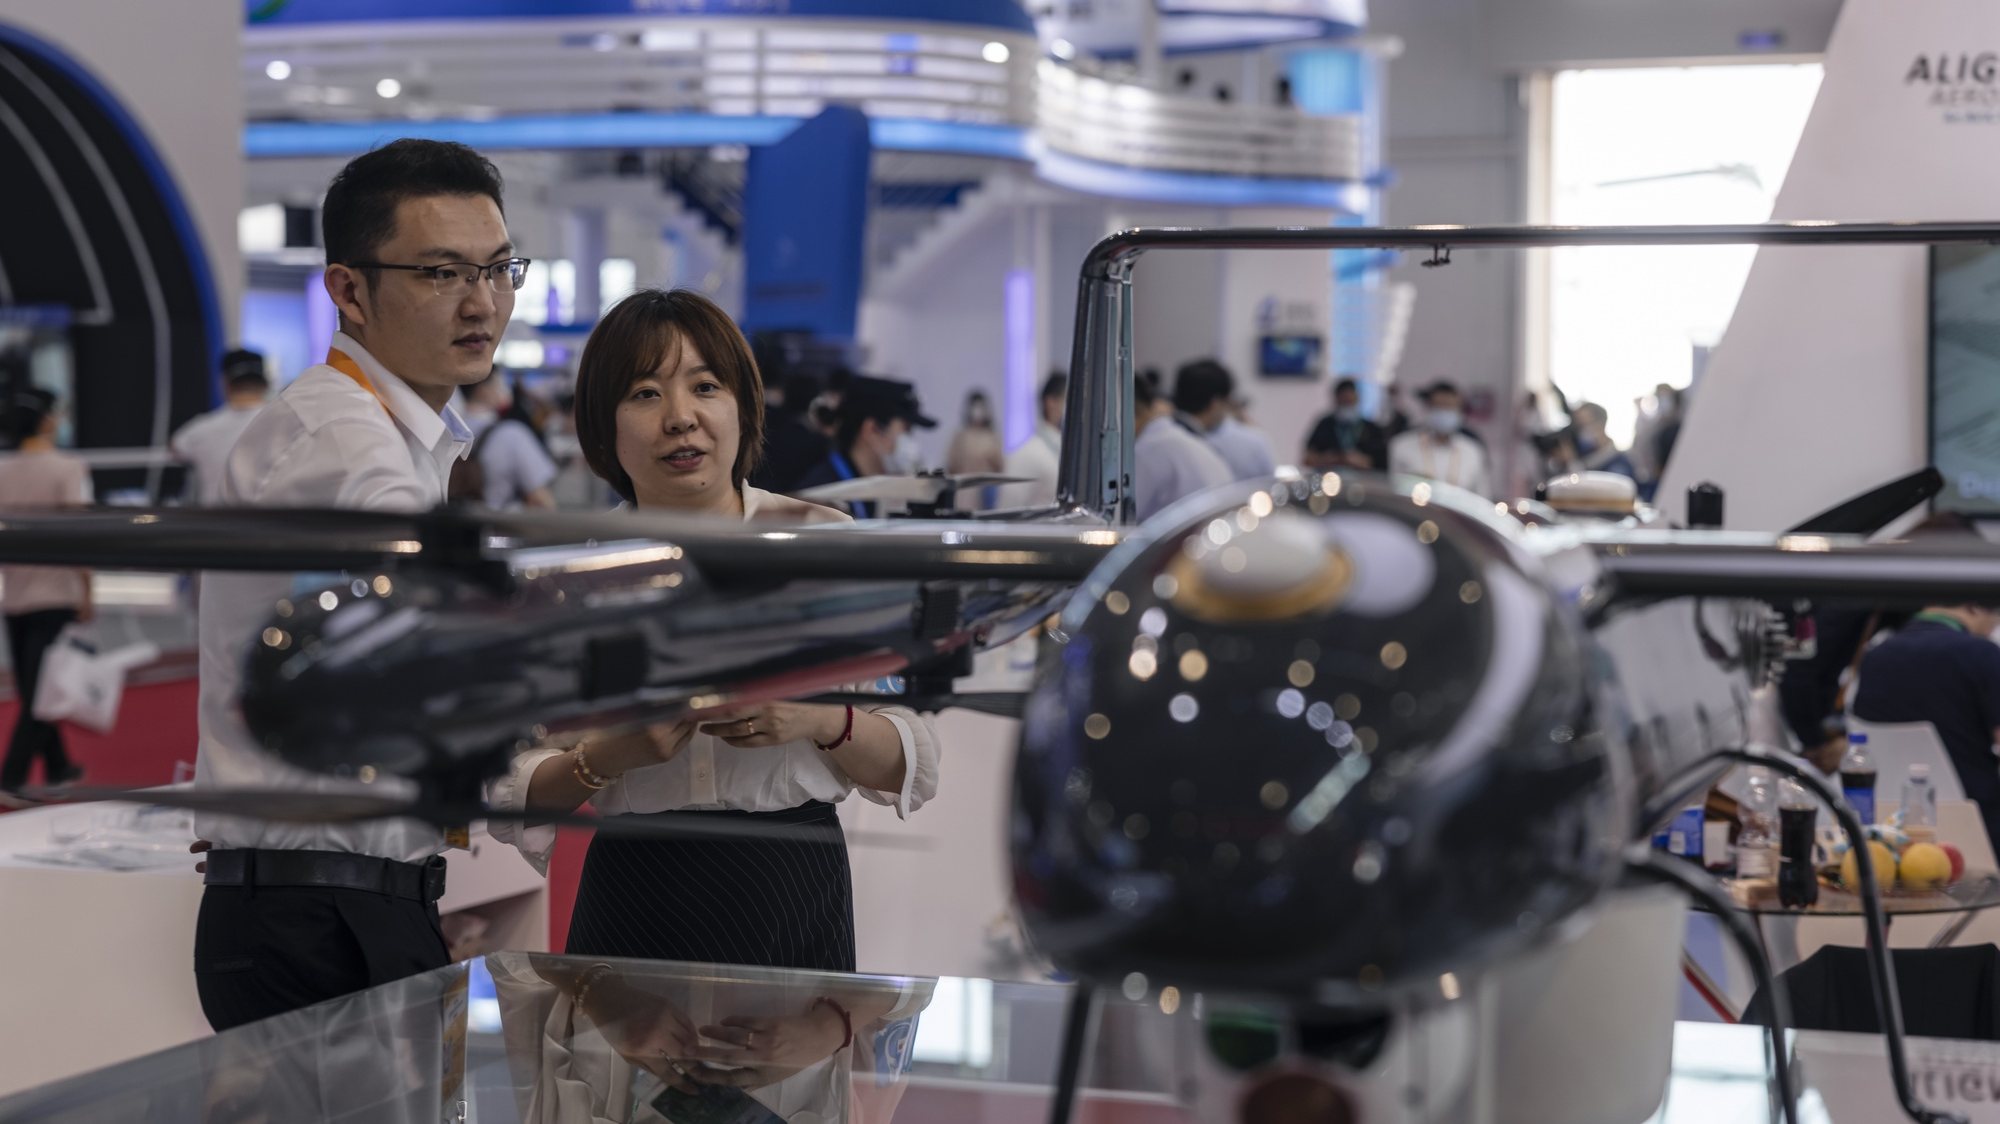 epa09492562 People look at an unmanned aerial vehicle (UAV) during the 13th China International Aviation and Aerospace Exhibition in Zhuhai, Guangdong province, China, 28 September 2021. The event, also known as Airshow China, runs from 28 September through 03 October 2021. According to military commentator Song Zhongping&#039;s statement to the media, the exhibition presents sophisticated surveillance drones and jets able to jam electronic equipment with a focus on disputed territories from Taiwan to the South China Sea. Airshow China has become one of the top five air shows in the world.  EPA/ALEX PLAVEVSKI